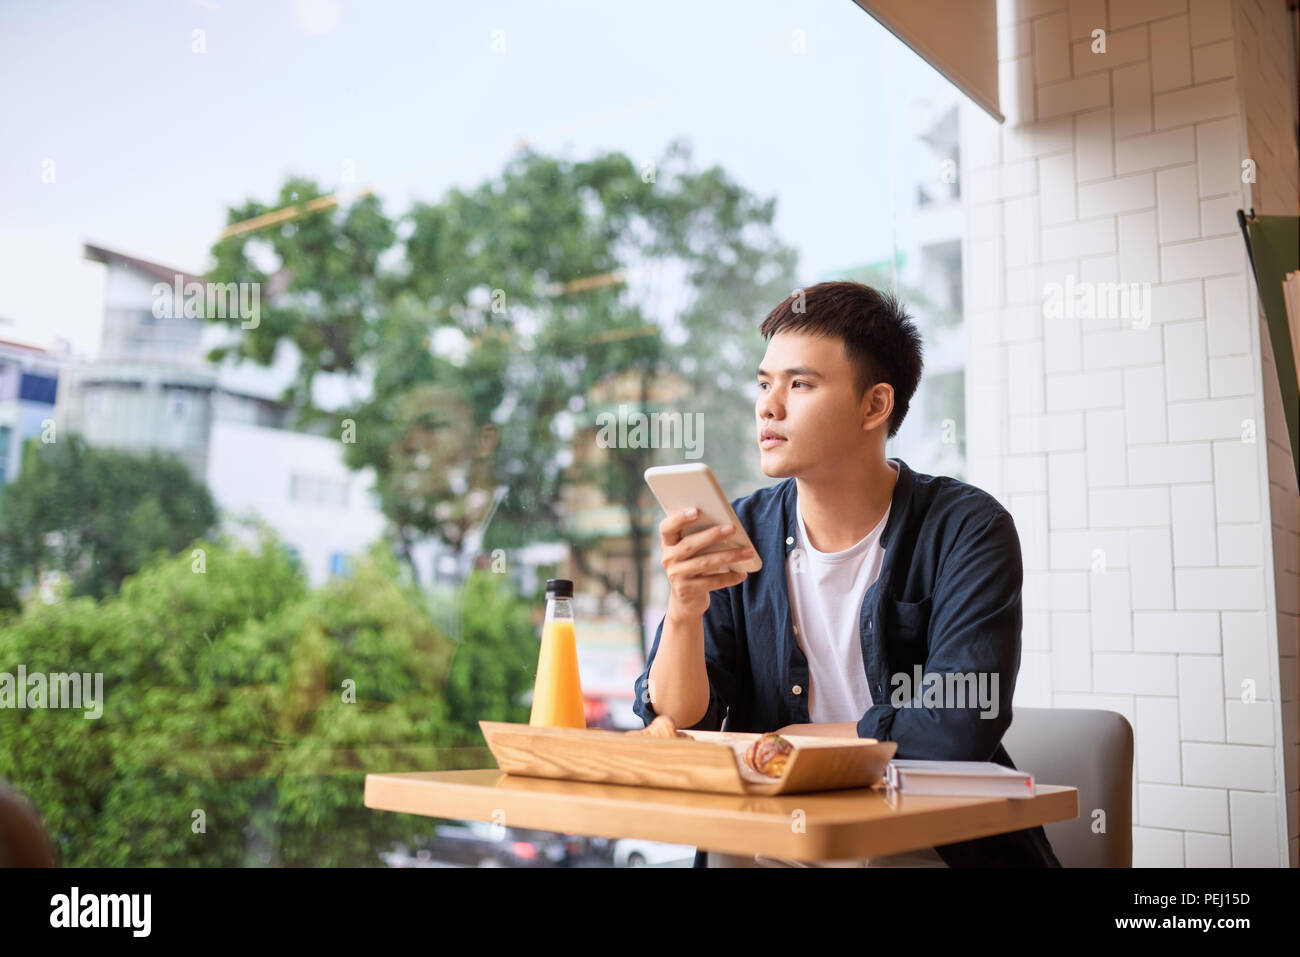 Men use phone on tea time,using mobile smart phone, Internet of things lifestyle with wireless communication and internet with smartphone. Stock Photo